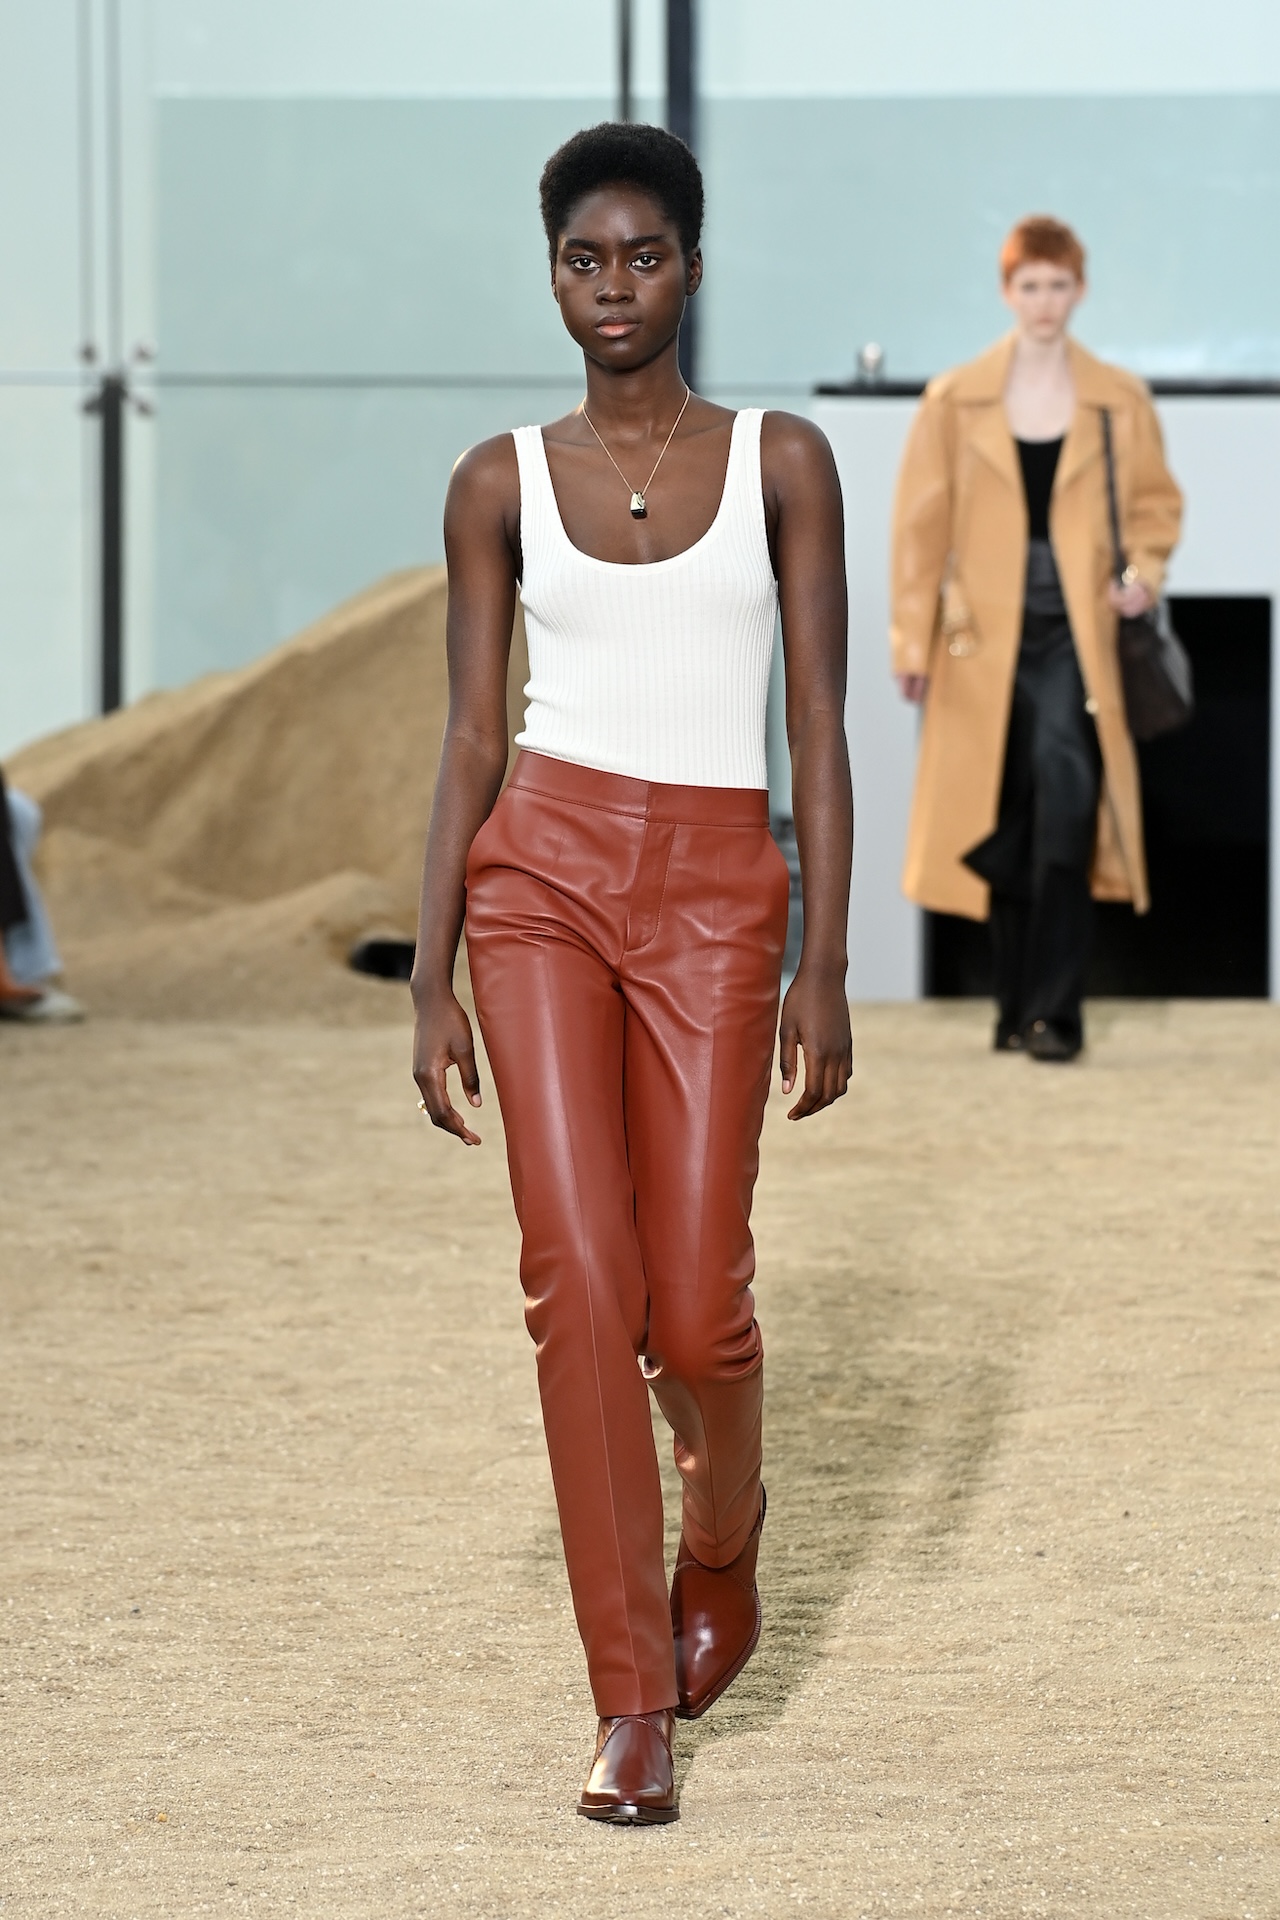 How To Style Brown Leather Pants This Season